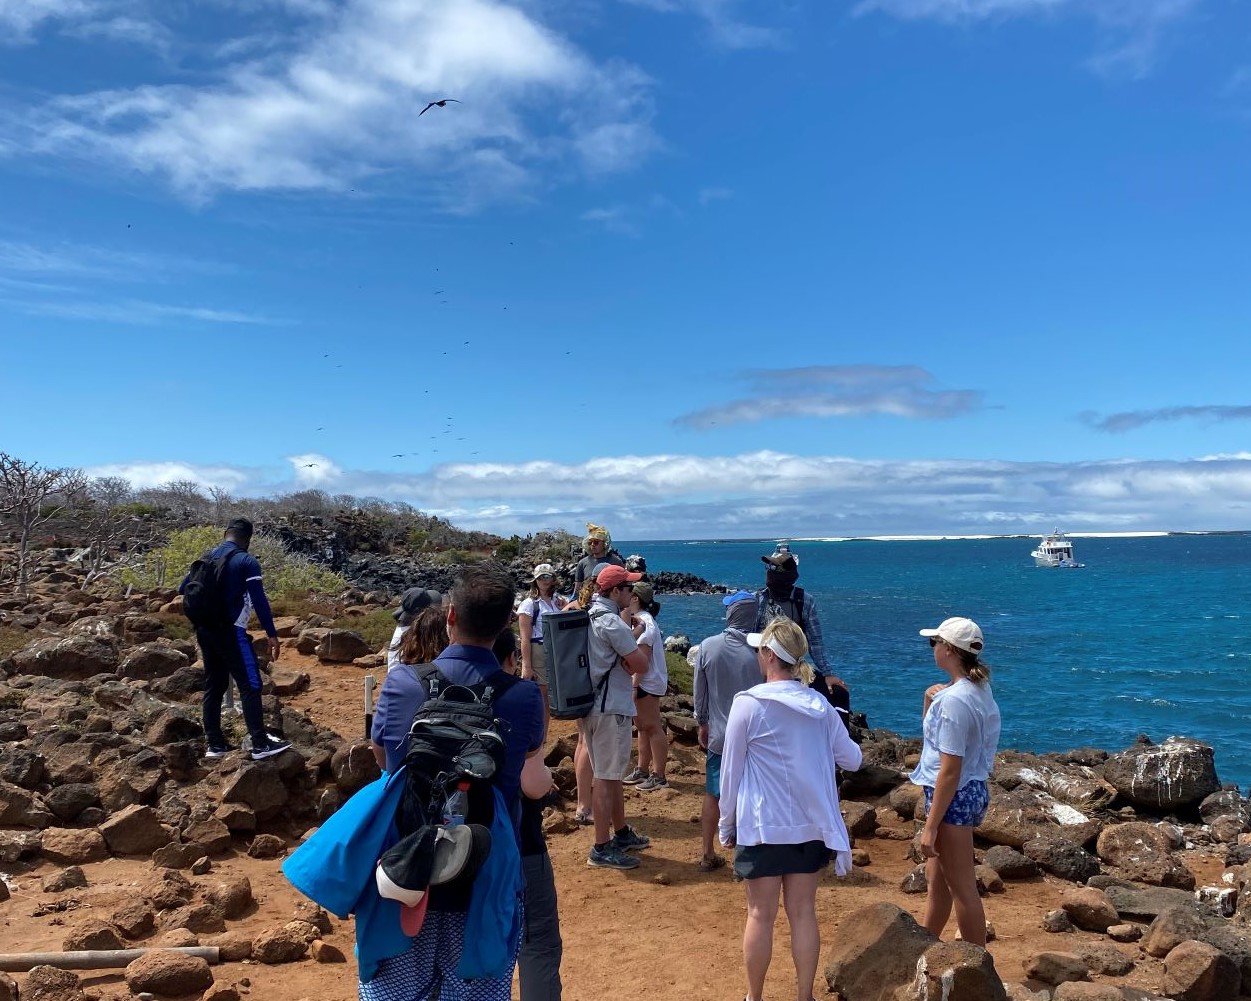 Group exploring a beach in the Galapagos